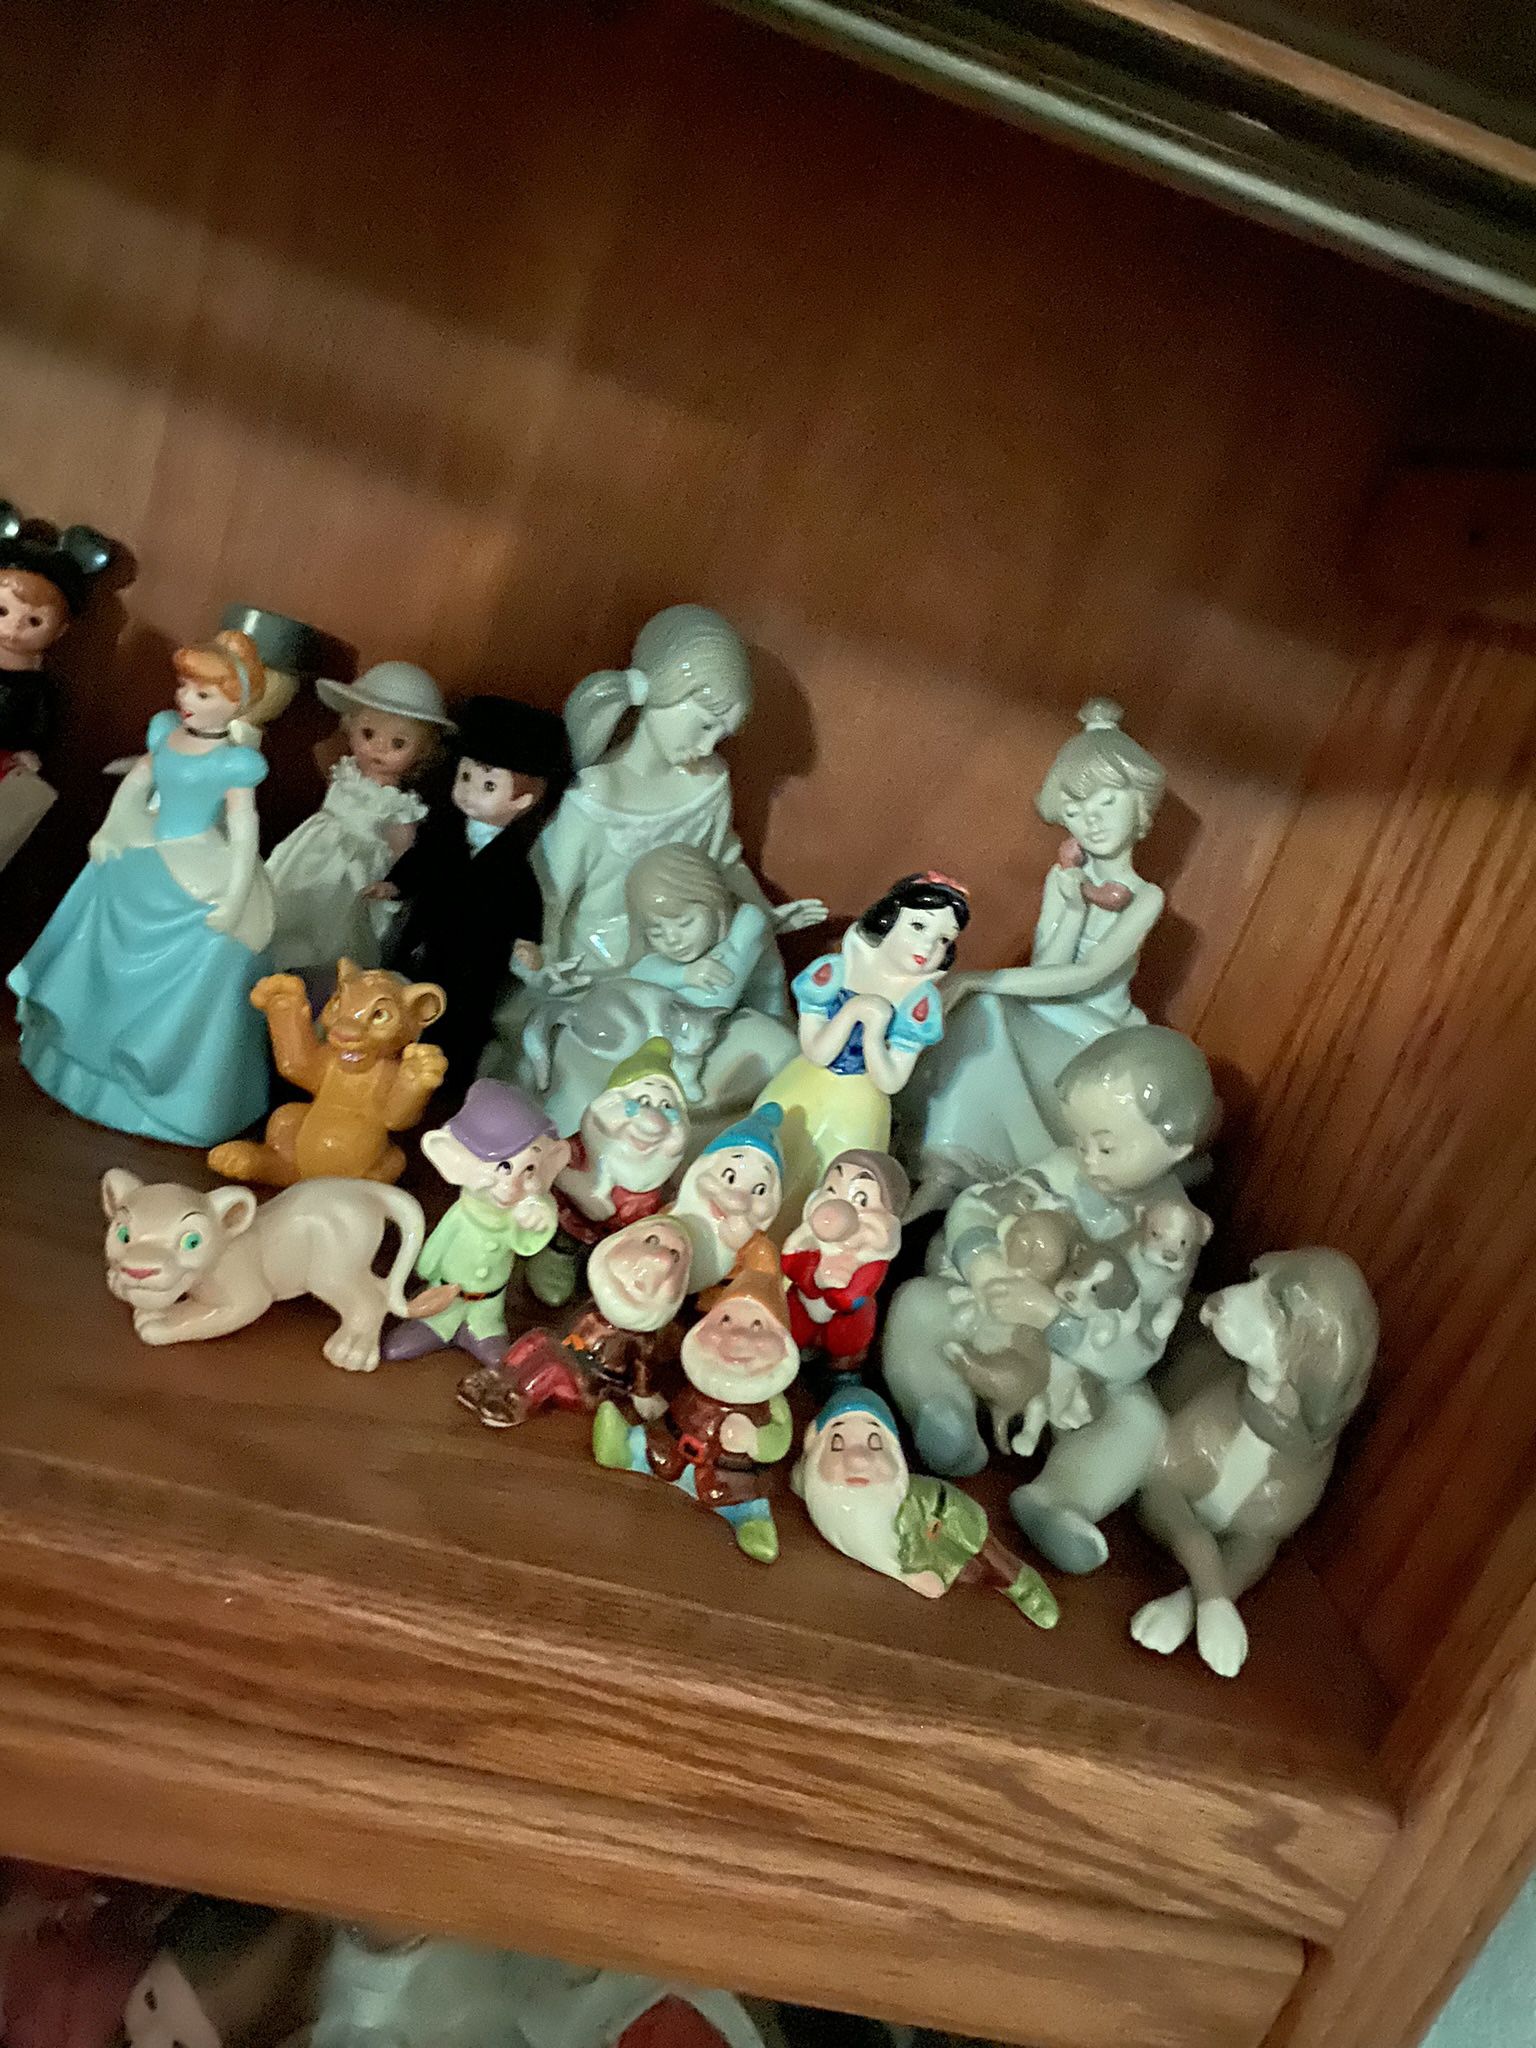 Disneyland Figurines, Madame Alexanders Like Britney Spears Owned & Lladro Collections